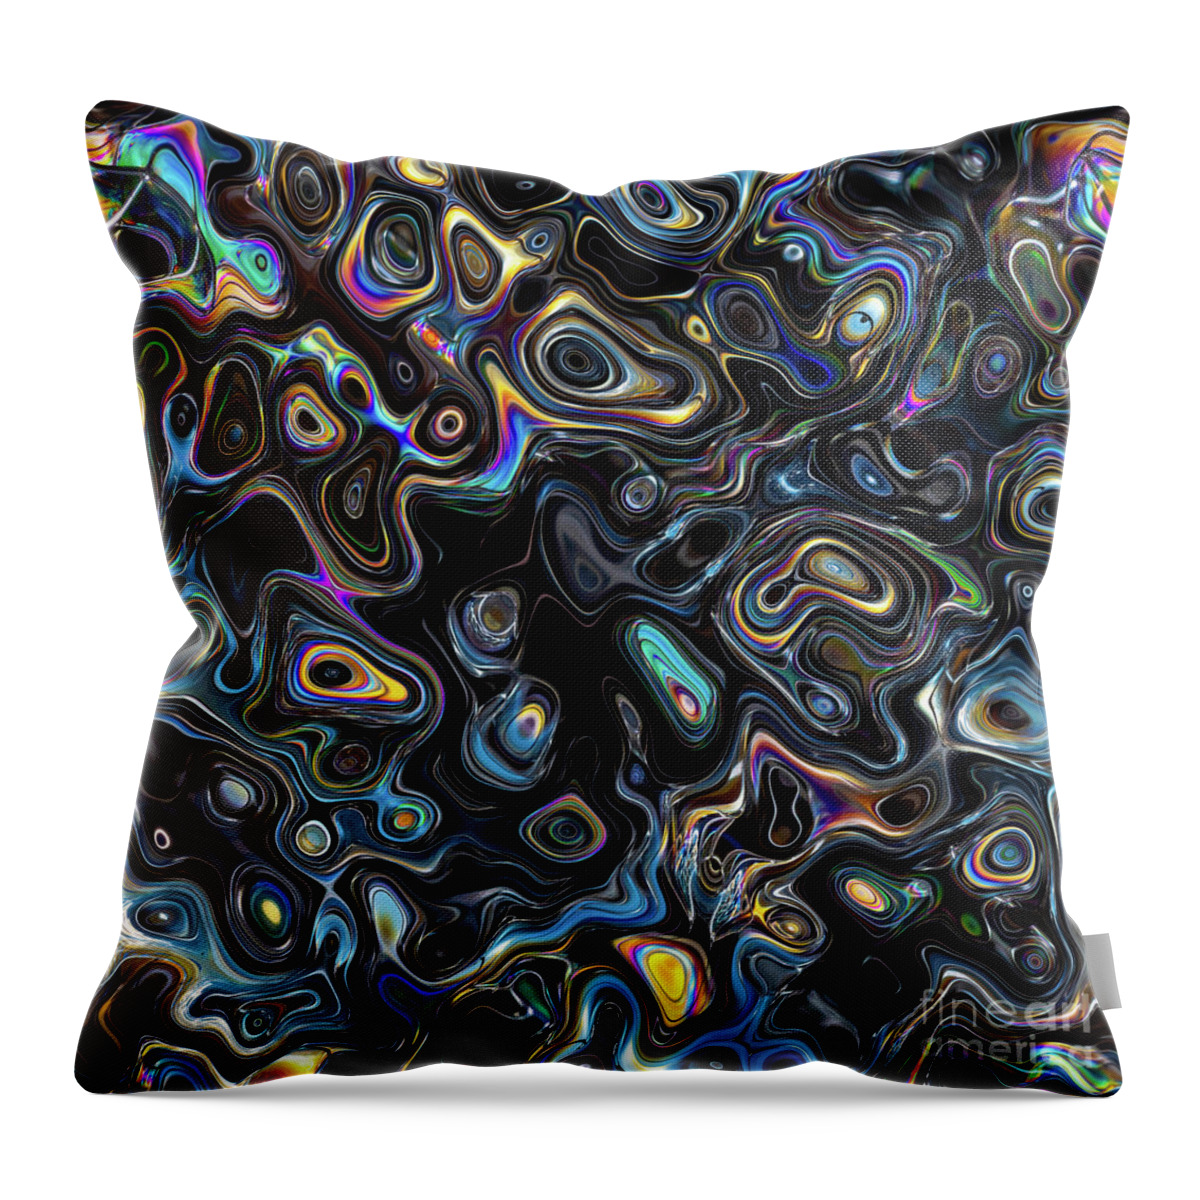 Psychedelic Throw Pillow featuring the digital art Abstract Psychedelic Pattern by Phil Perkins